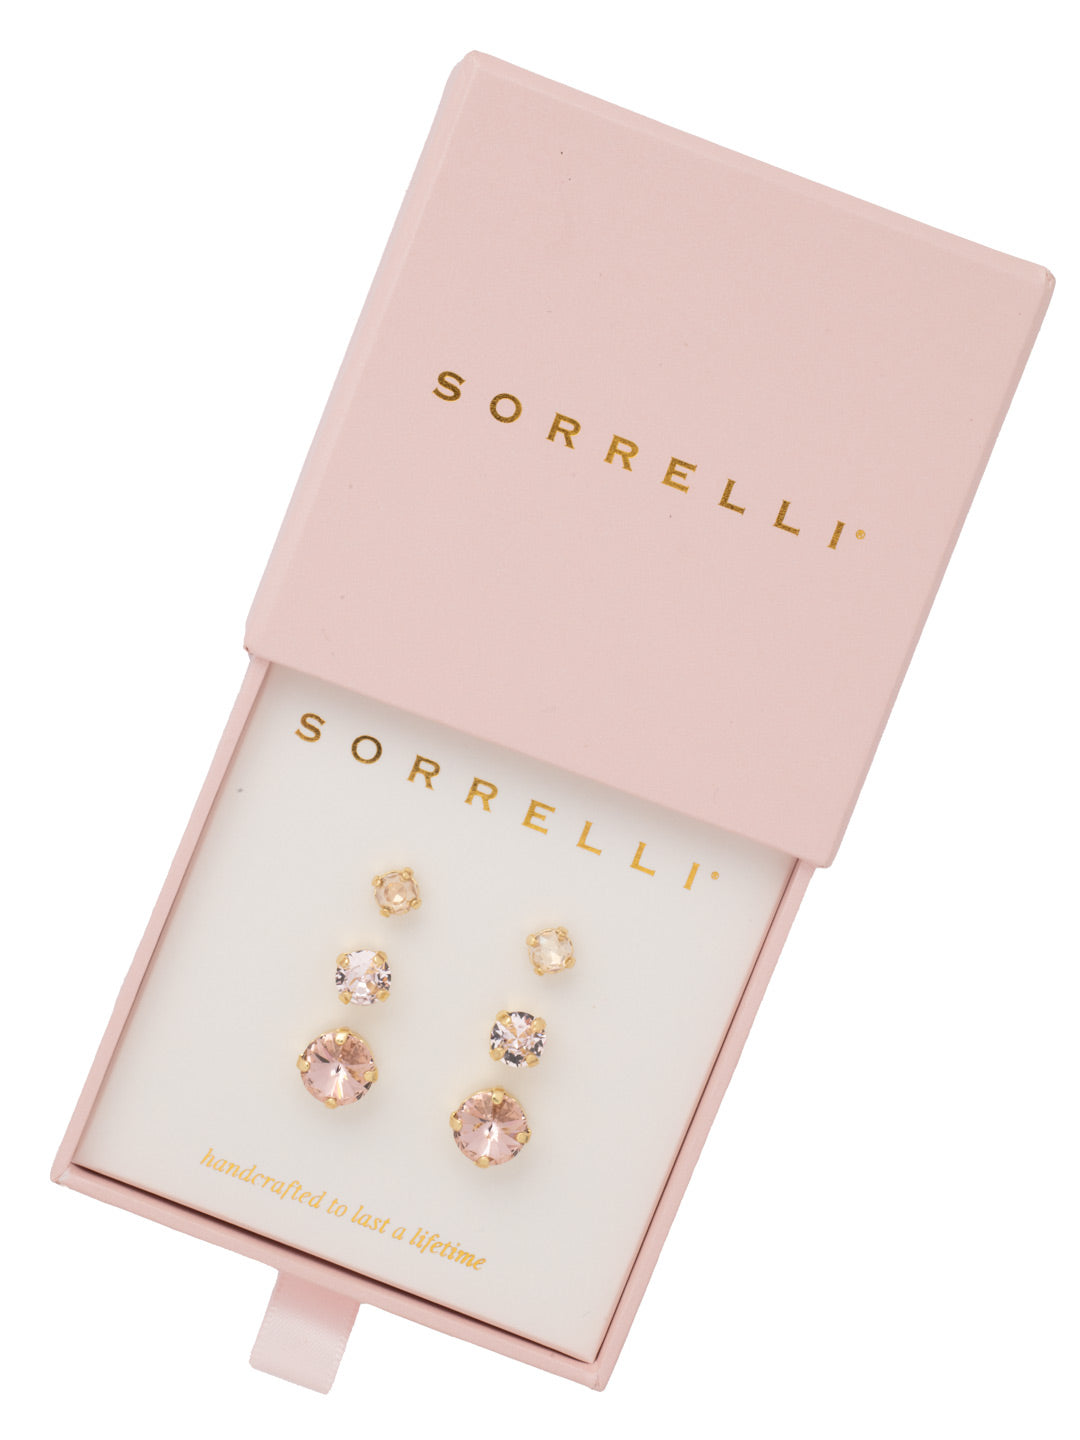 Three Studs Earring Gift Set - GFL1BGSBL - <p>Three of our best-selling studs in a single gift set box. From Sorrelli's Satin Blush collection in our Bright Gold-tone finish.</p>